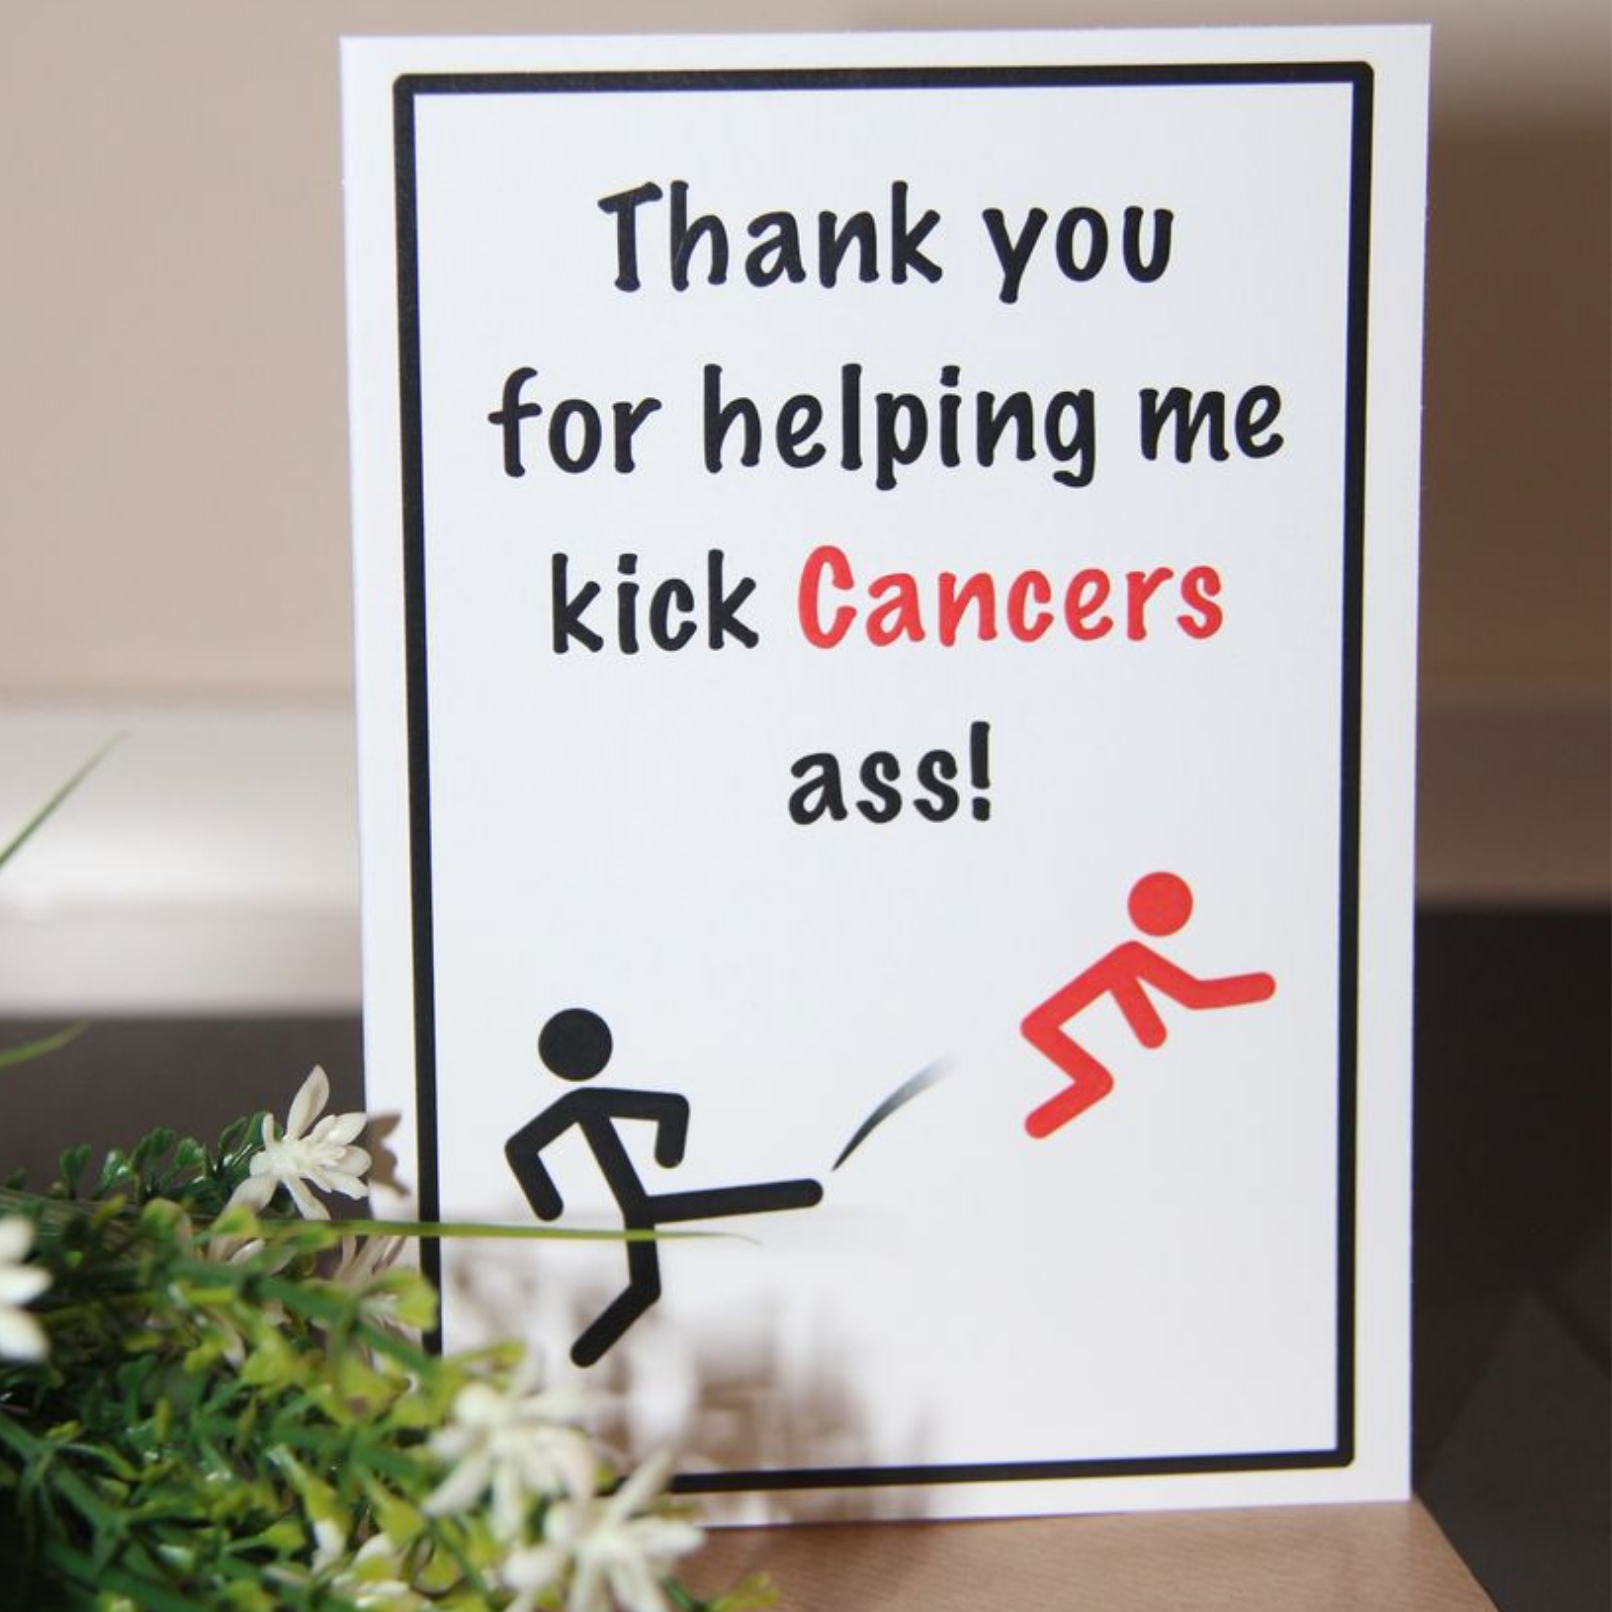 Thank You For Helping Me Kick Cancers A** - Card